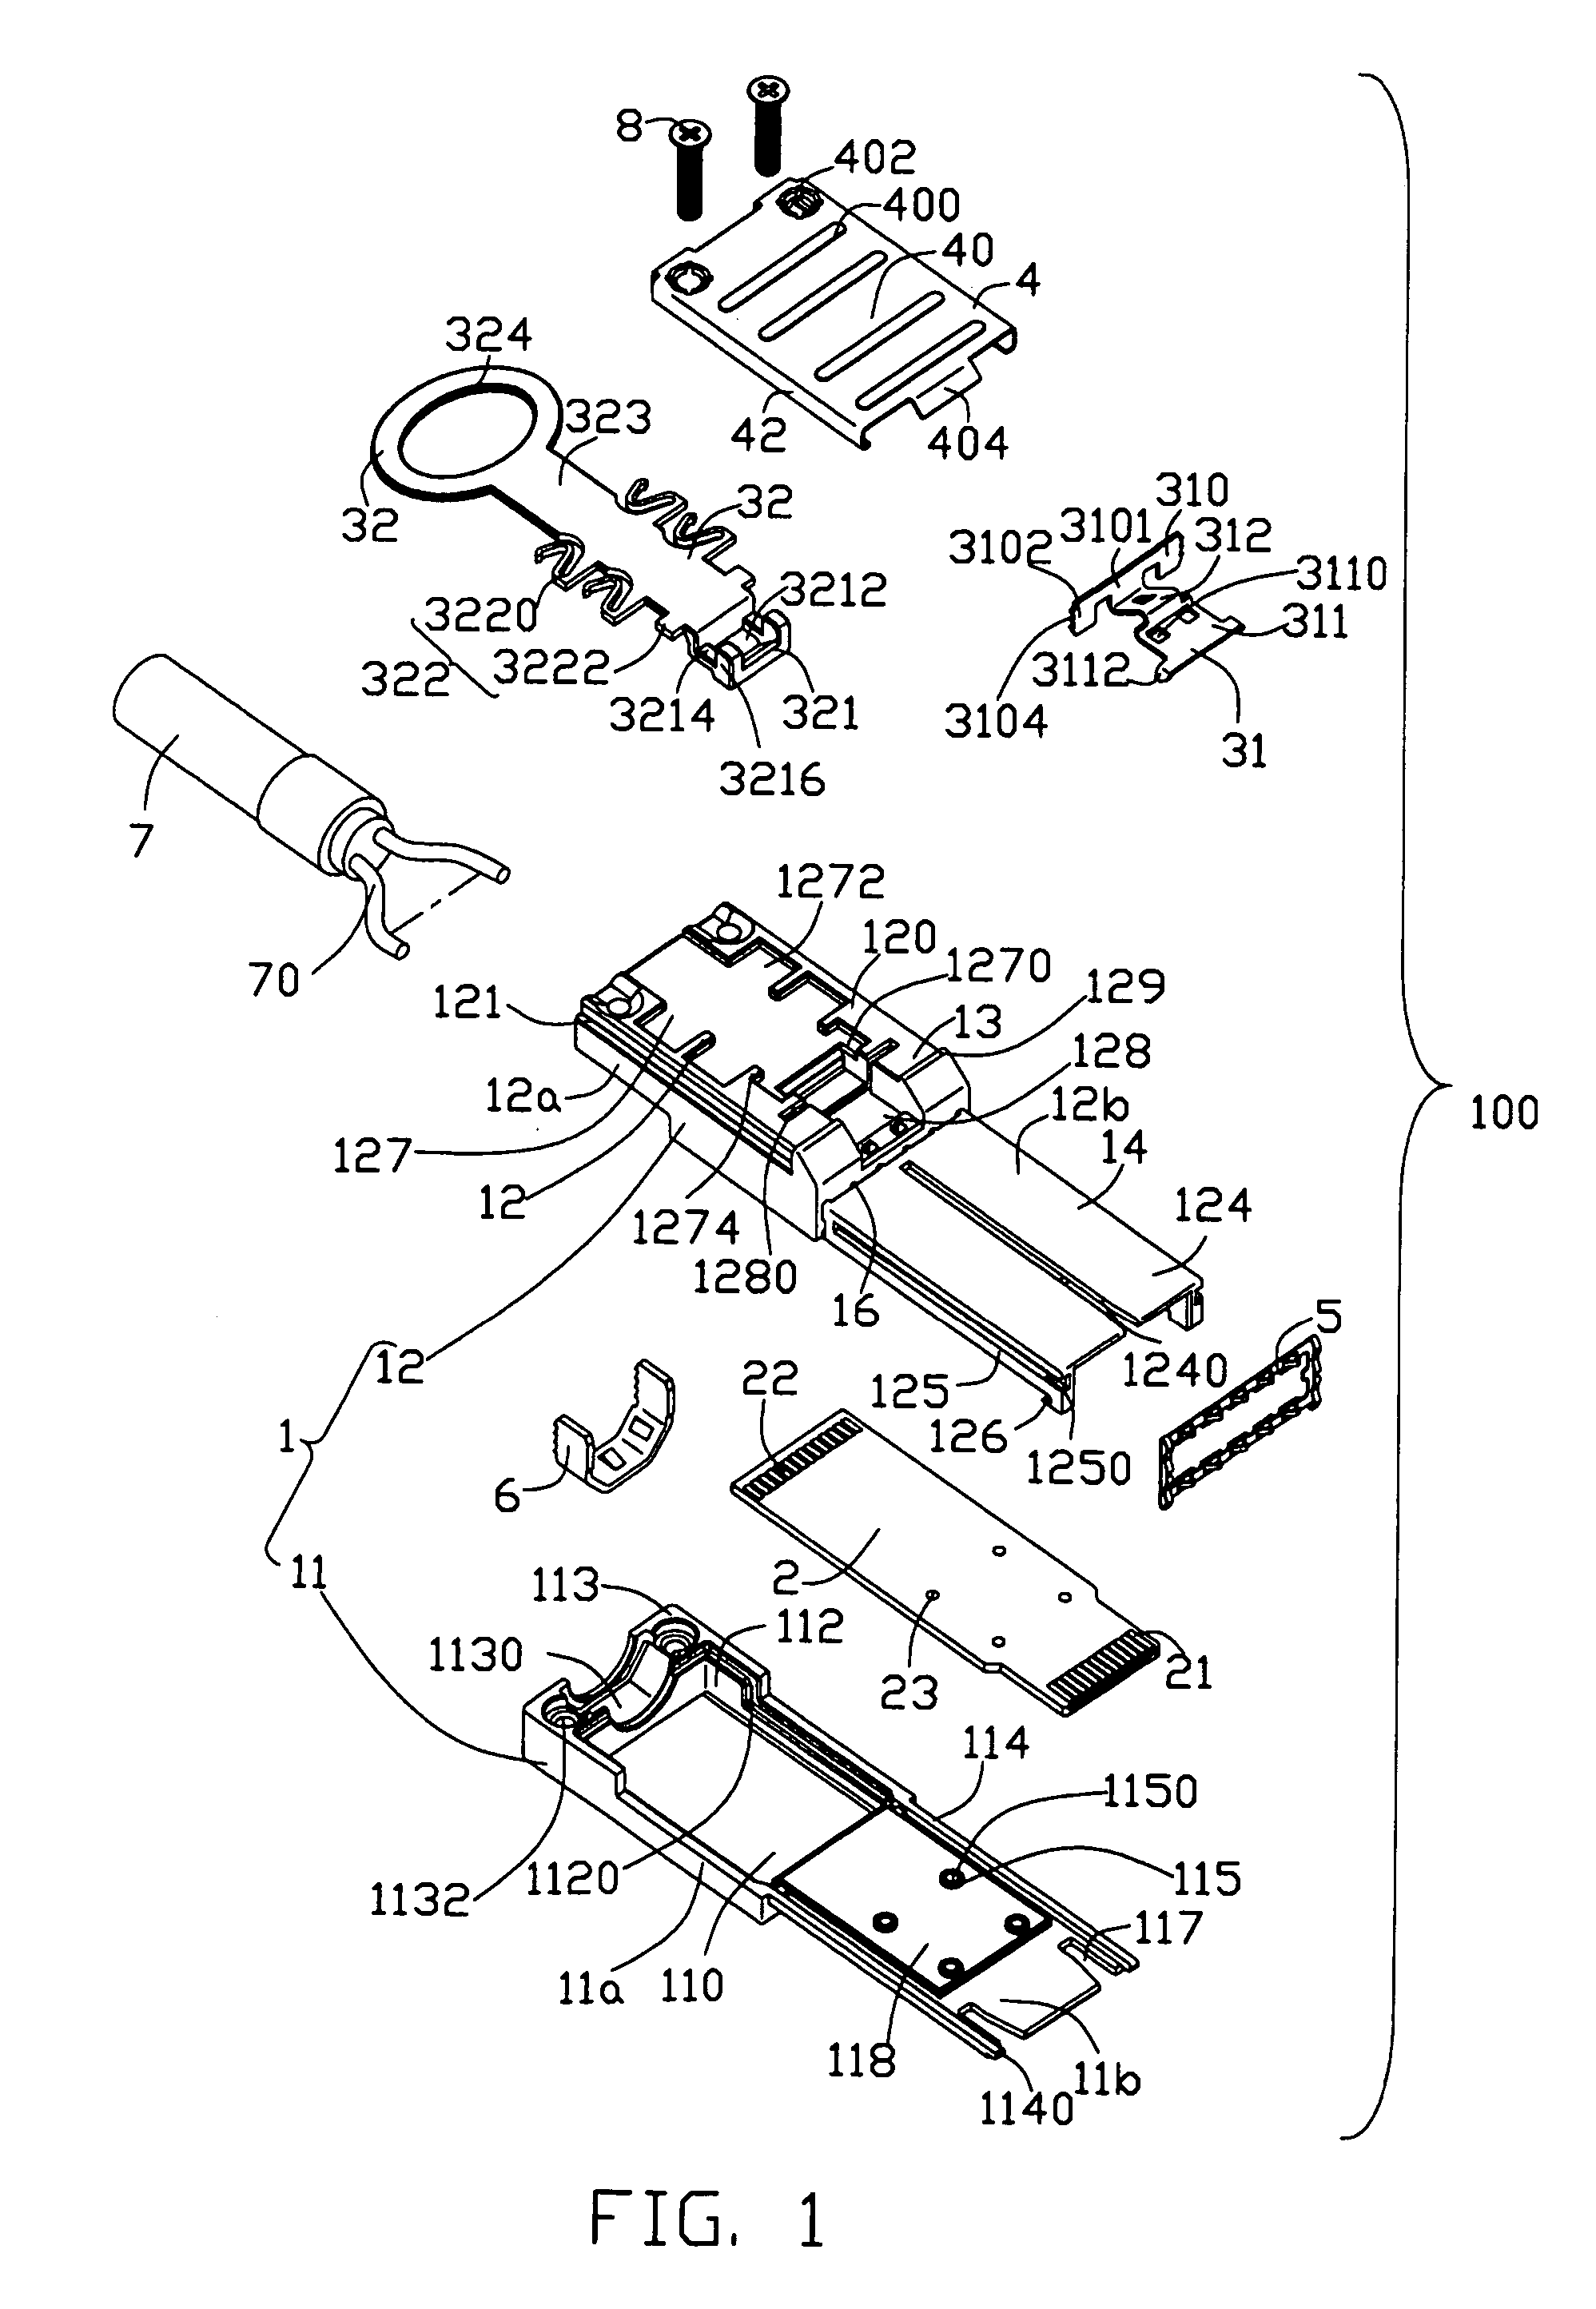 Cable connector assembly with EMI gasket